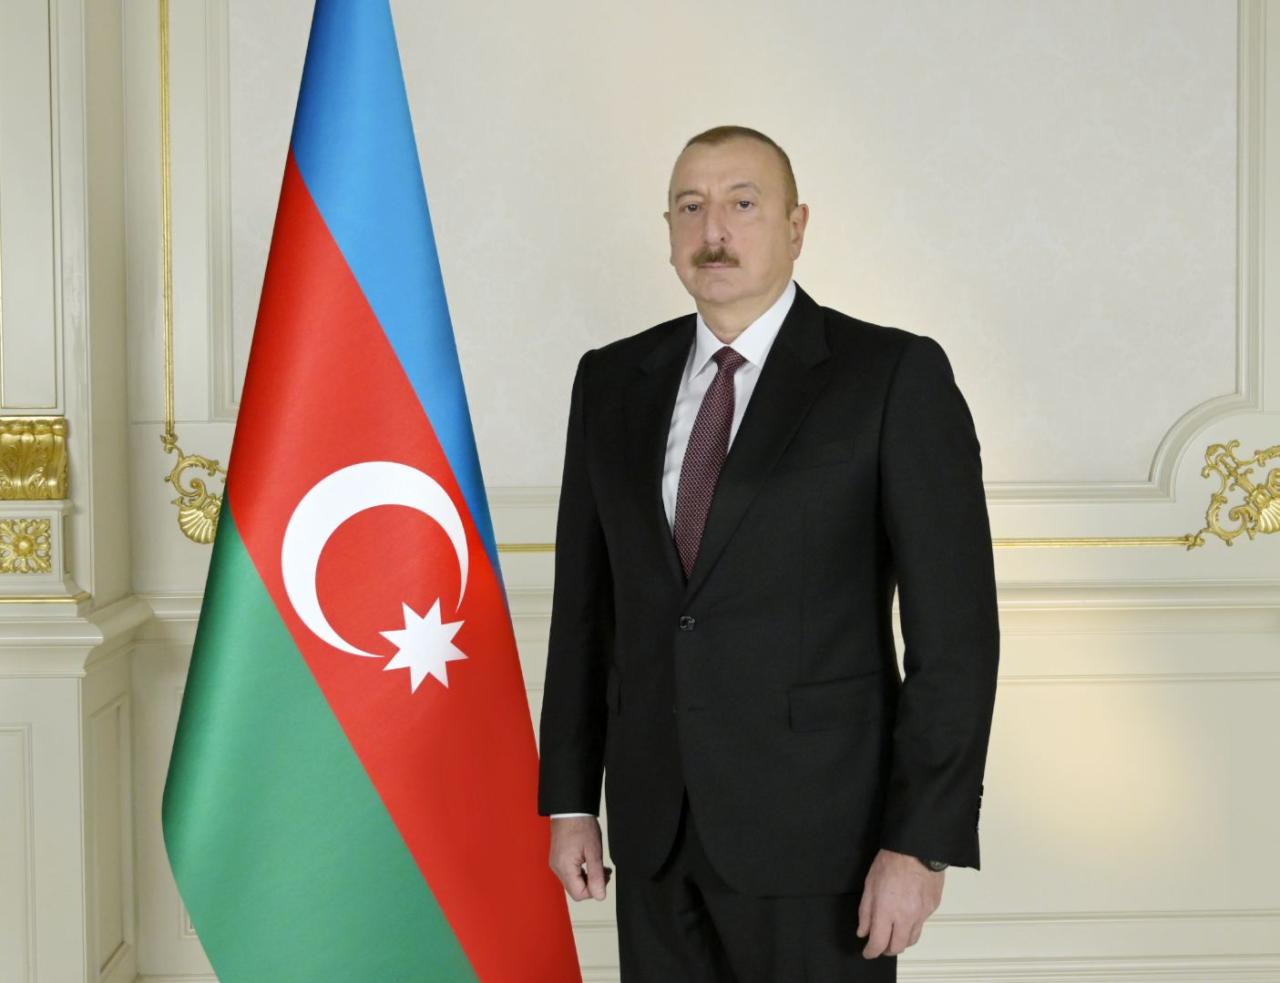 President Ilham Aliyev makes Facebook post on Constitution Day [PHOTO]